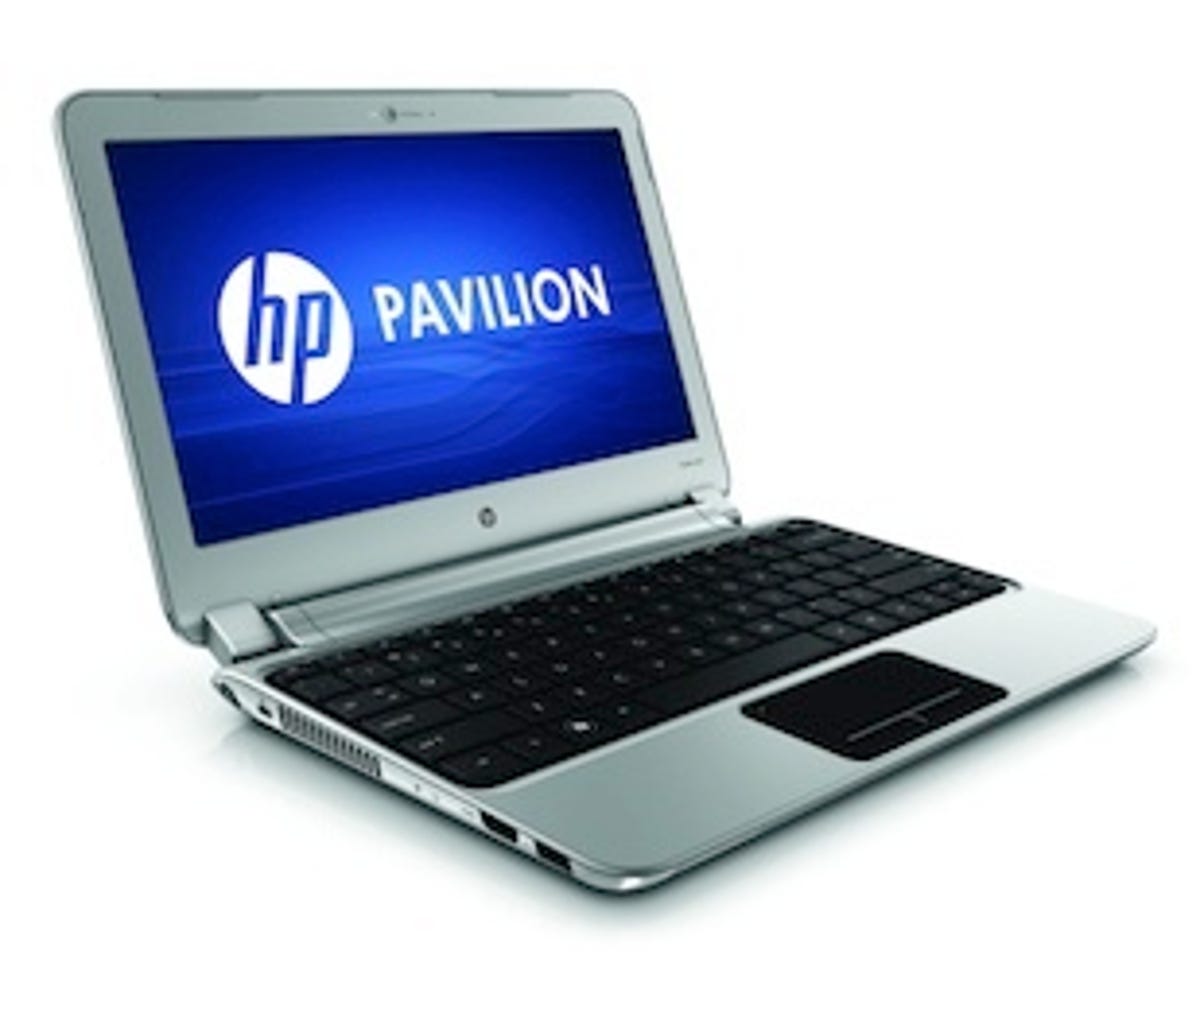 HP's 3.5-pound dm1 uses an AMD 1.6GHz dual-core E350 chip that integrates Radeon HD 6310M graphics.